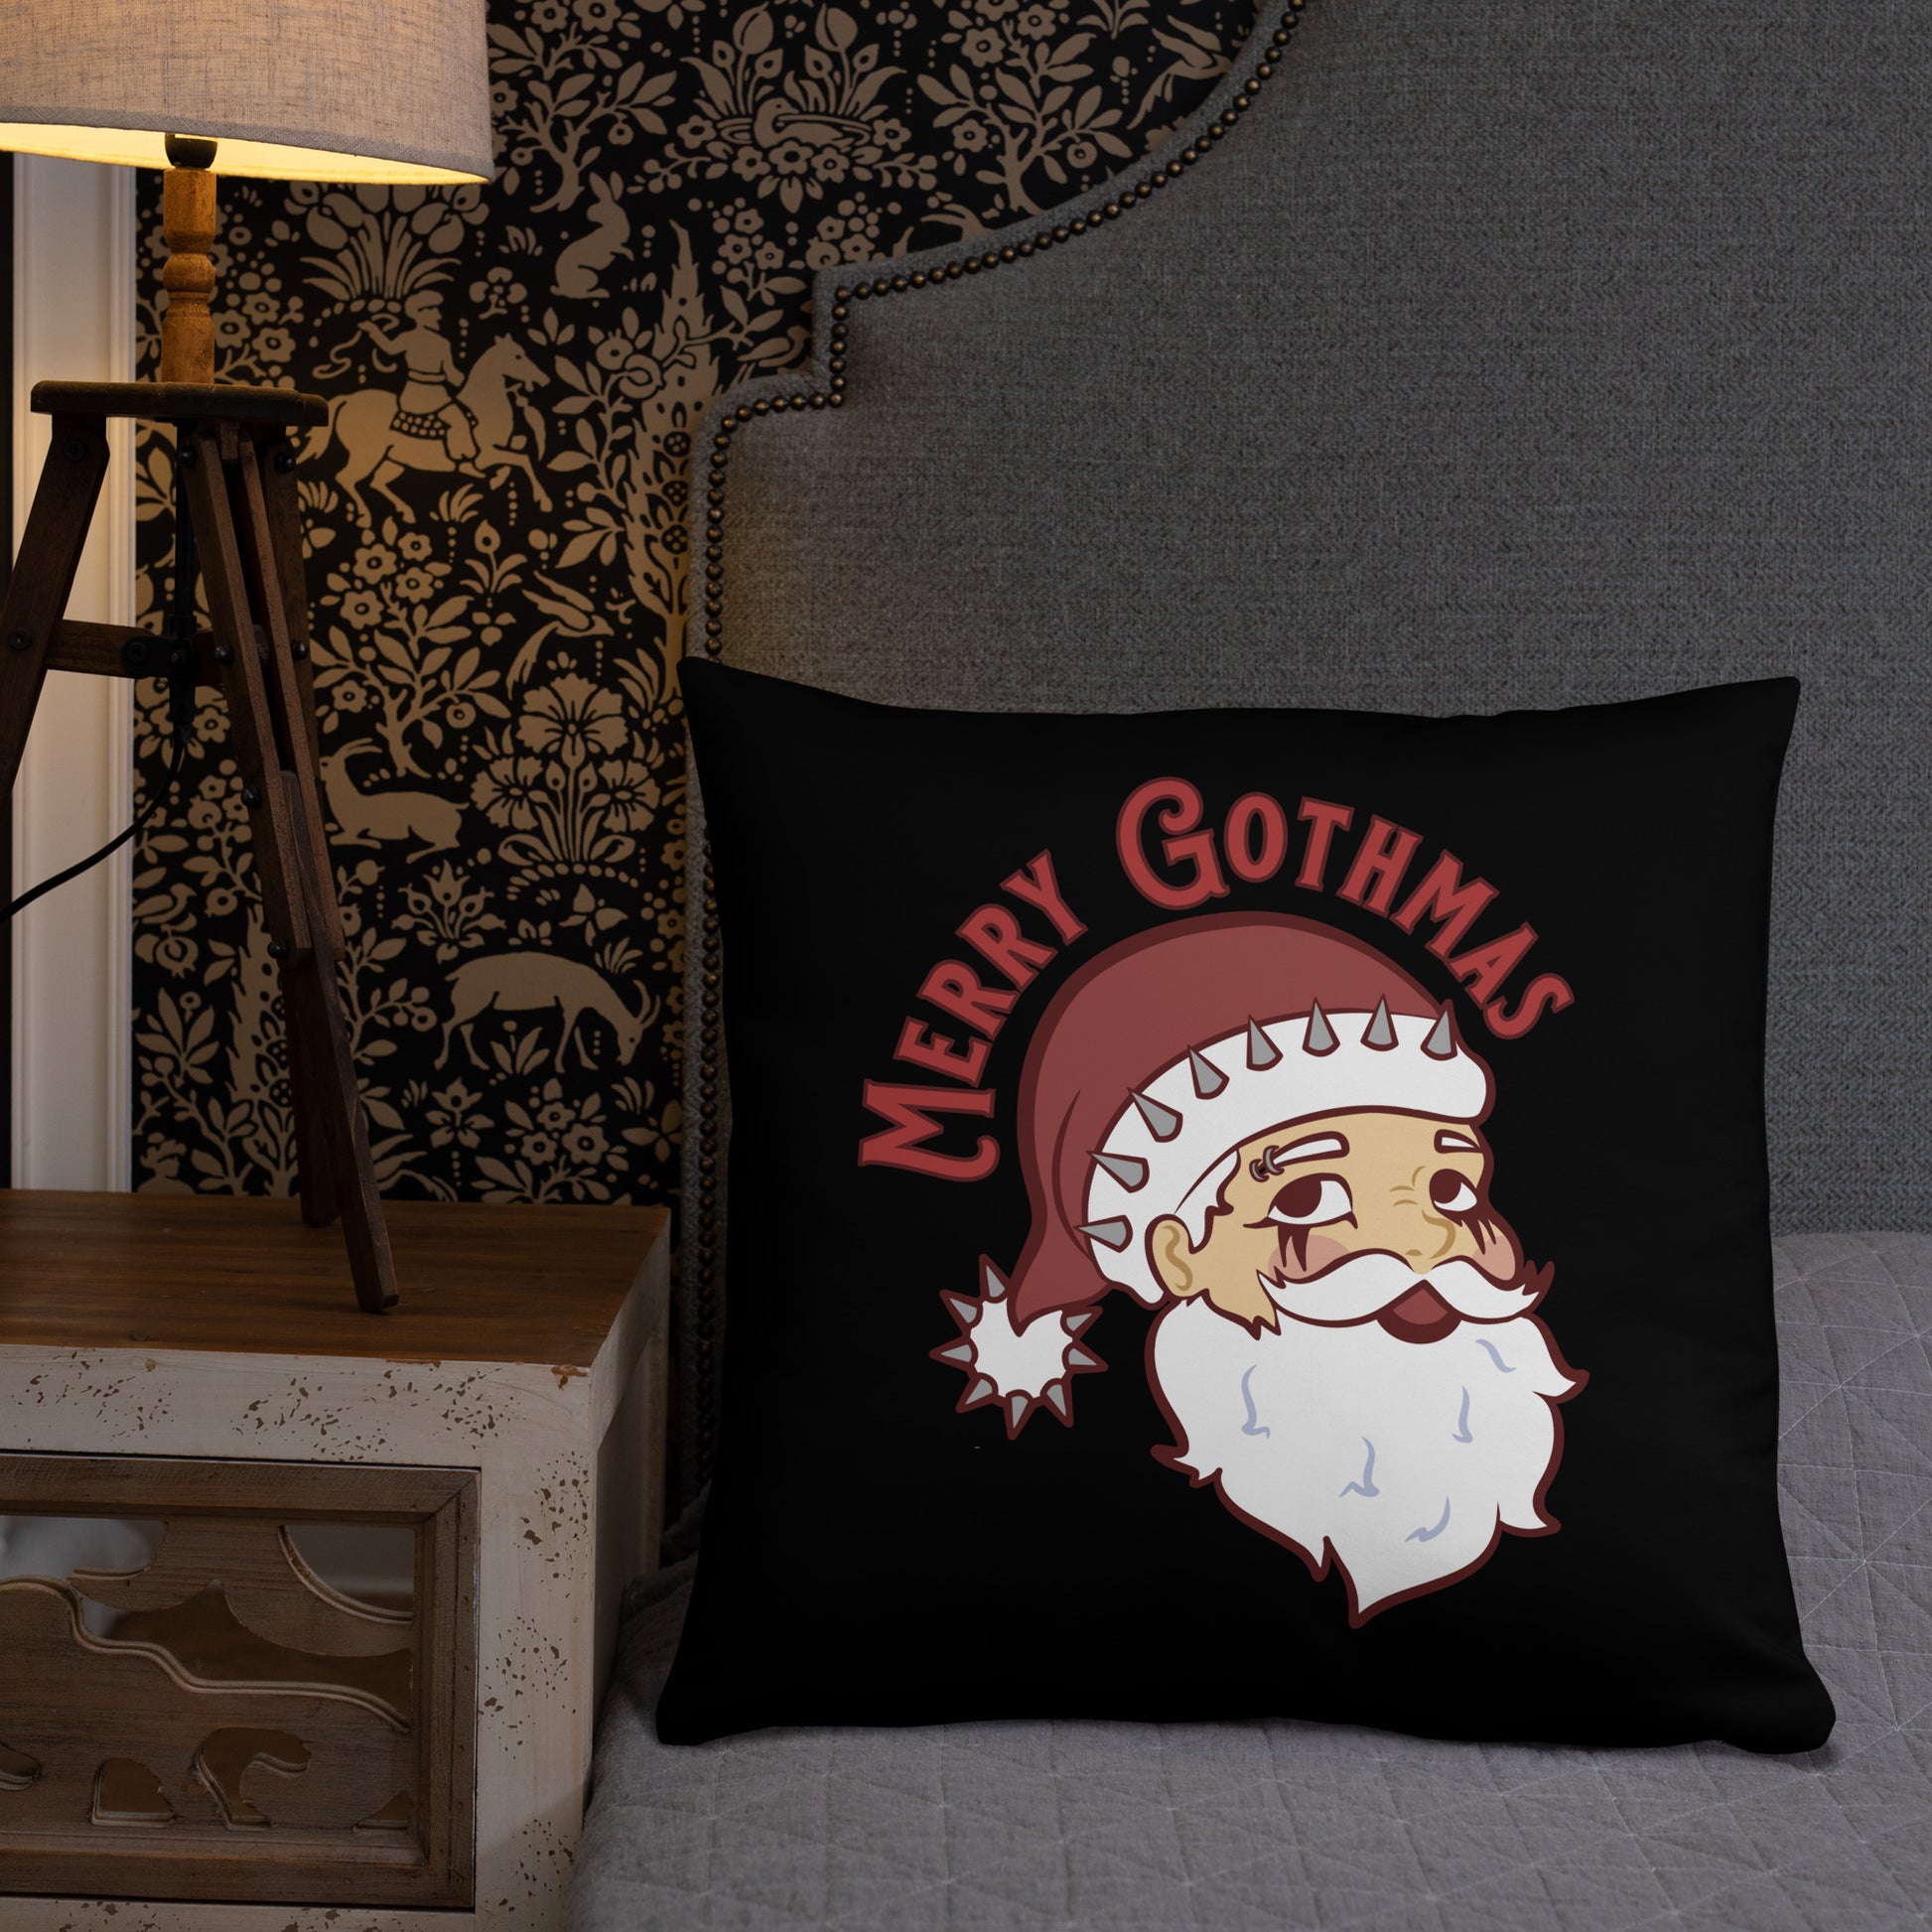 A black 22" x 22" throw pillow featuring an image of Santa Claus rests on a gray bed. Santa is wearing goth-style makeup and his hat is decorated with spikes. Text above Santa's head reads "Merry Gothmas"